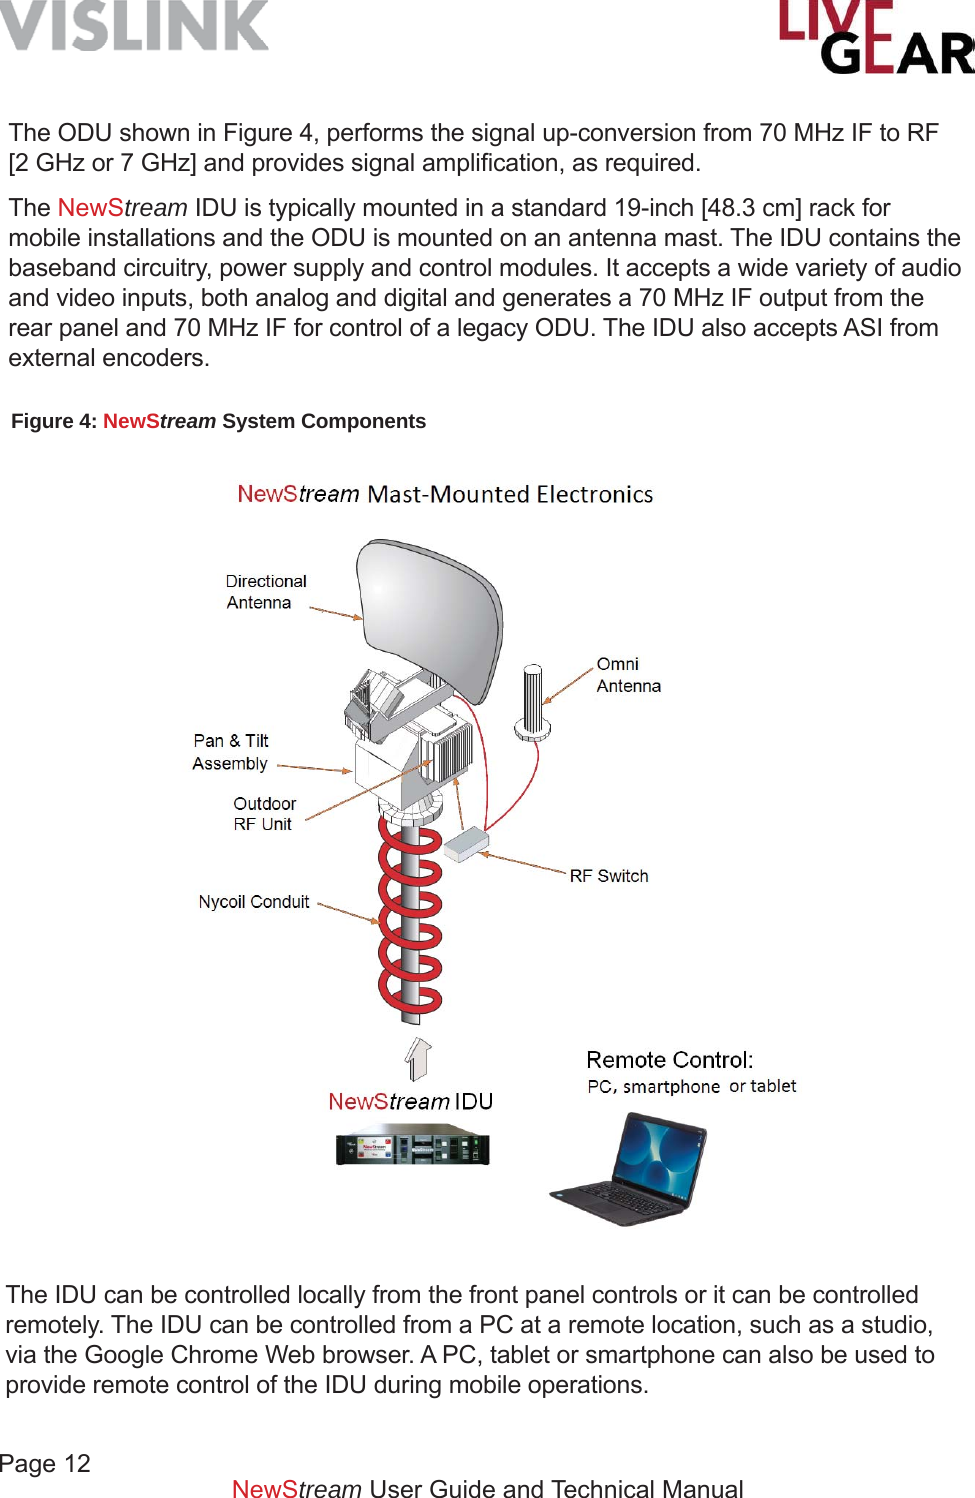 Page 12NewStream User Guide and Technical ManualThe ODU shown in Figure 4, performs the signal up-conversion from 70 MHz IF to RF [2 GHz or 7 GHz] and provides signal ampliﬁ cation, as required. The NewStream IDU is typically mounted in a standard 19-inch [48.3 cm] rack for mobile installations and the ODU is mounted on an antenna mast. The IDU contains the baseband circuitry, power supply and control modules. It accepts a wide variety of audio and video inputs, both analog and digital and generates a 70 MHz IF output from the rear panel and 70 MHz IF for control of a legacy ODU. The IDU also accepts ASI from external encoders.Figure 4: NewStream System ComponentsThe IDU can be controlled locally from the front panel controls or it can be controlled remotely. The IDU can be controlled from a PC at a remote location, such as a studio, via the Google Chrome Web browser. A PC, tablet or smartphone can also be used to provide remote control of the IDU during mobile operations.